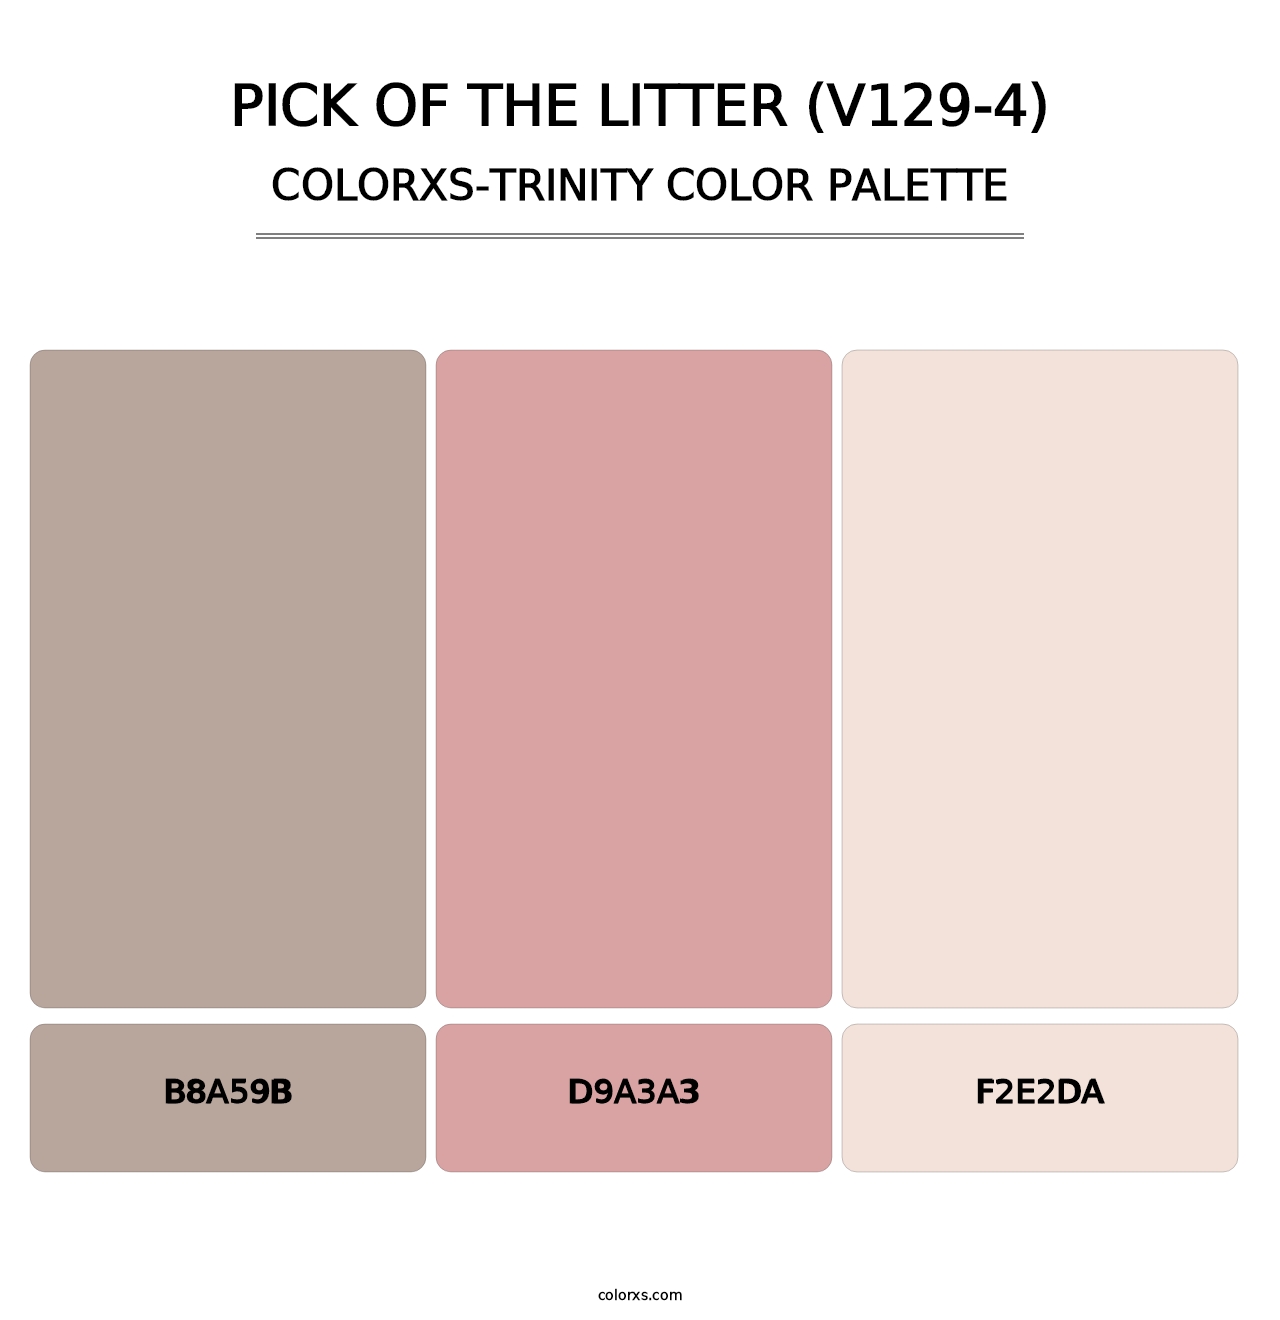 Pick of the Litter (V129-4) - Colorxs Trinity Palette